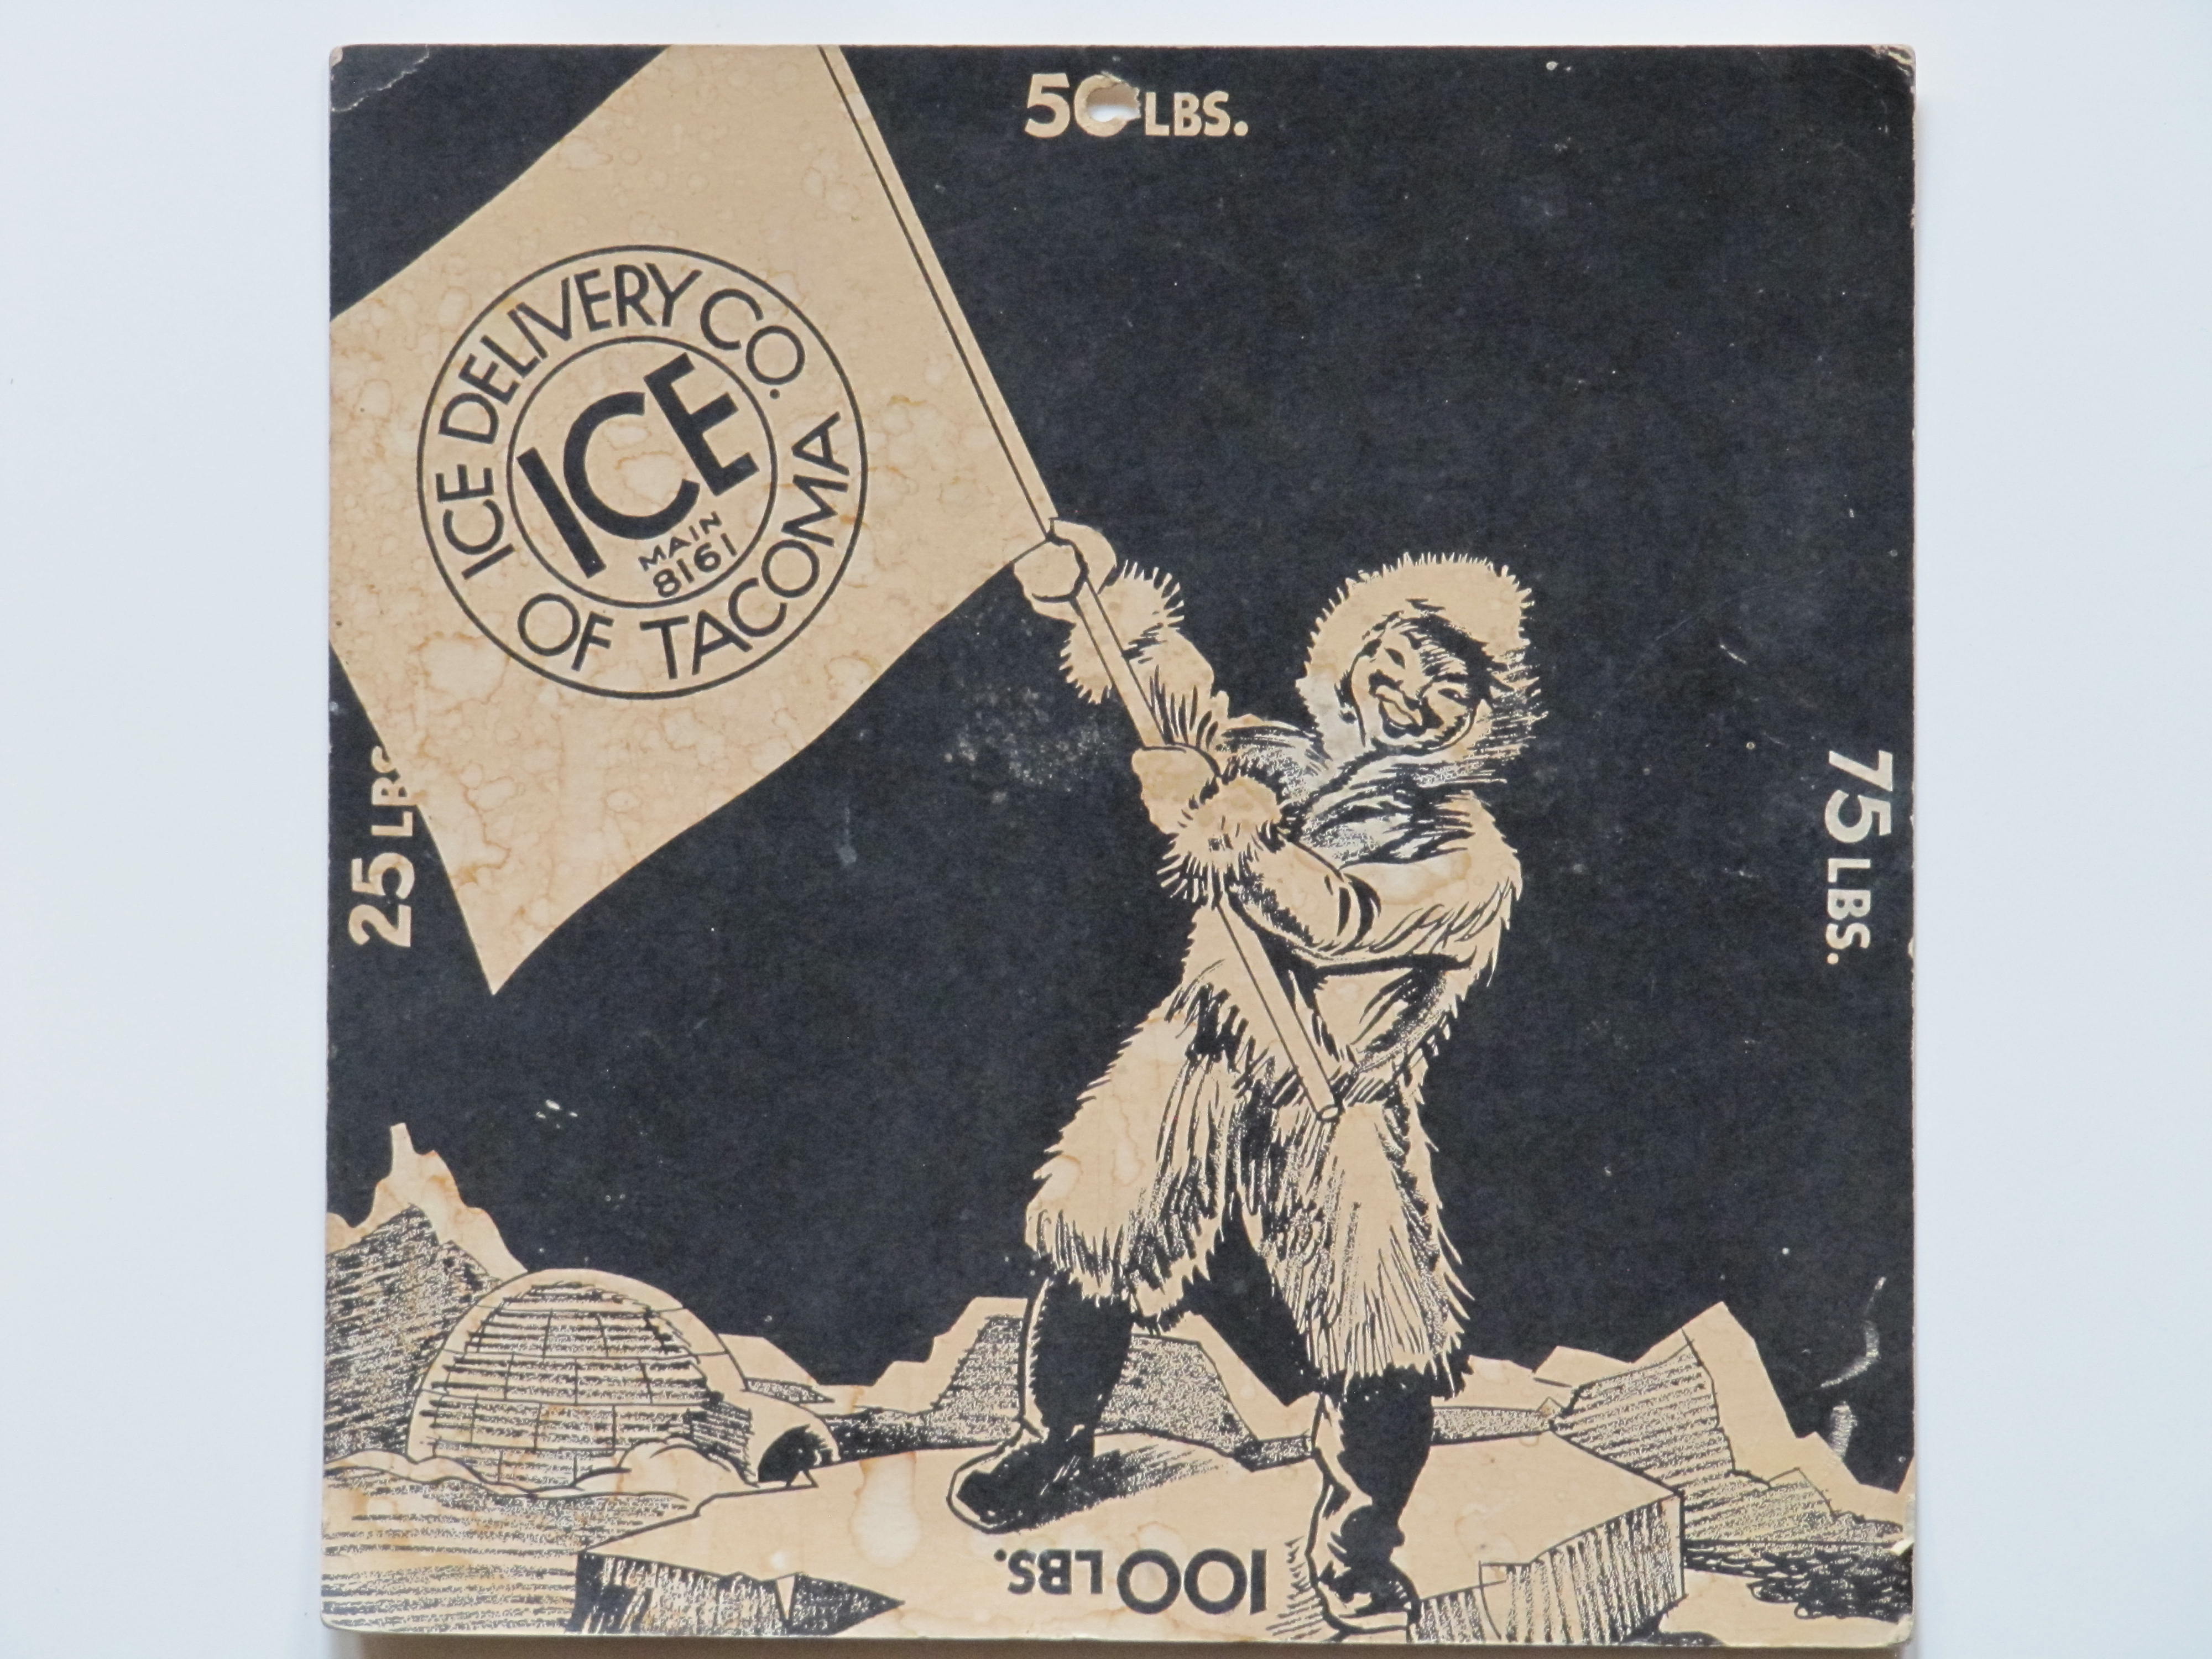 Ice Delivery Co. of Tacoma